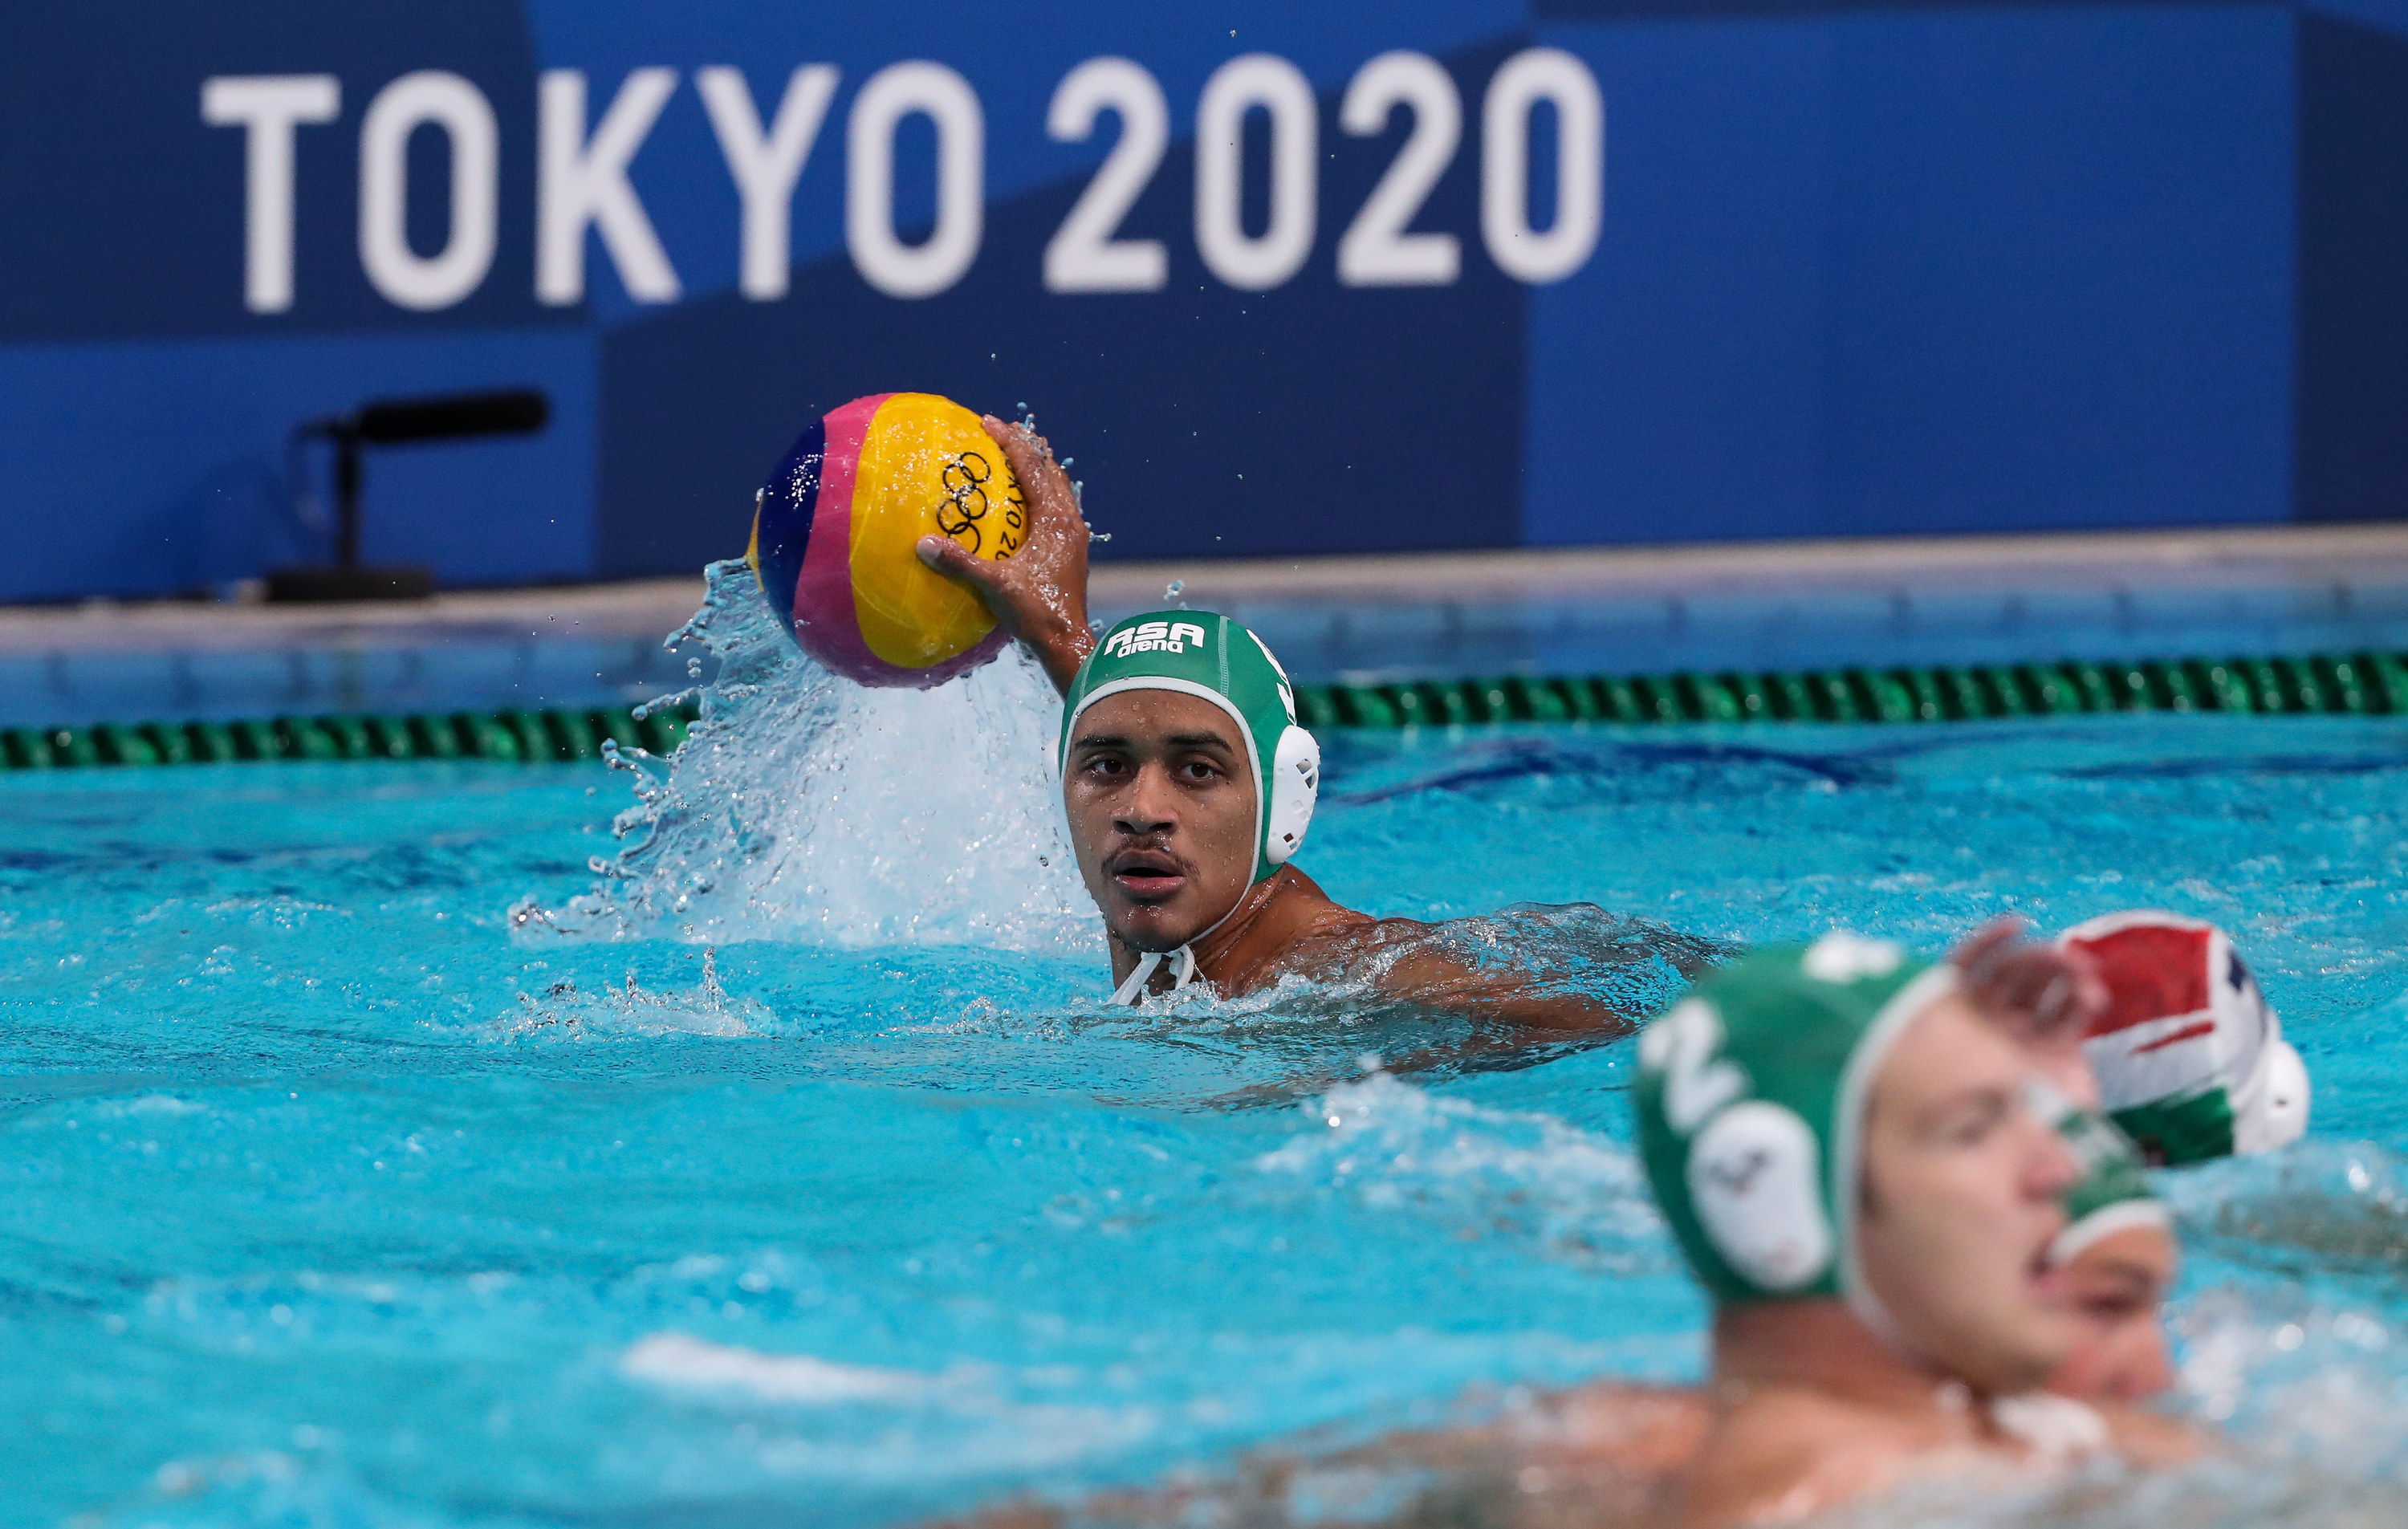 A South African water polo player in the pool